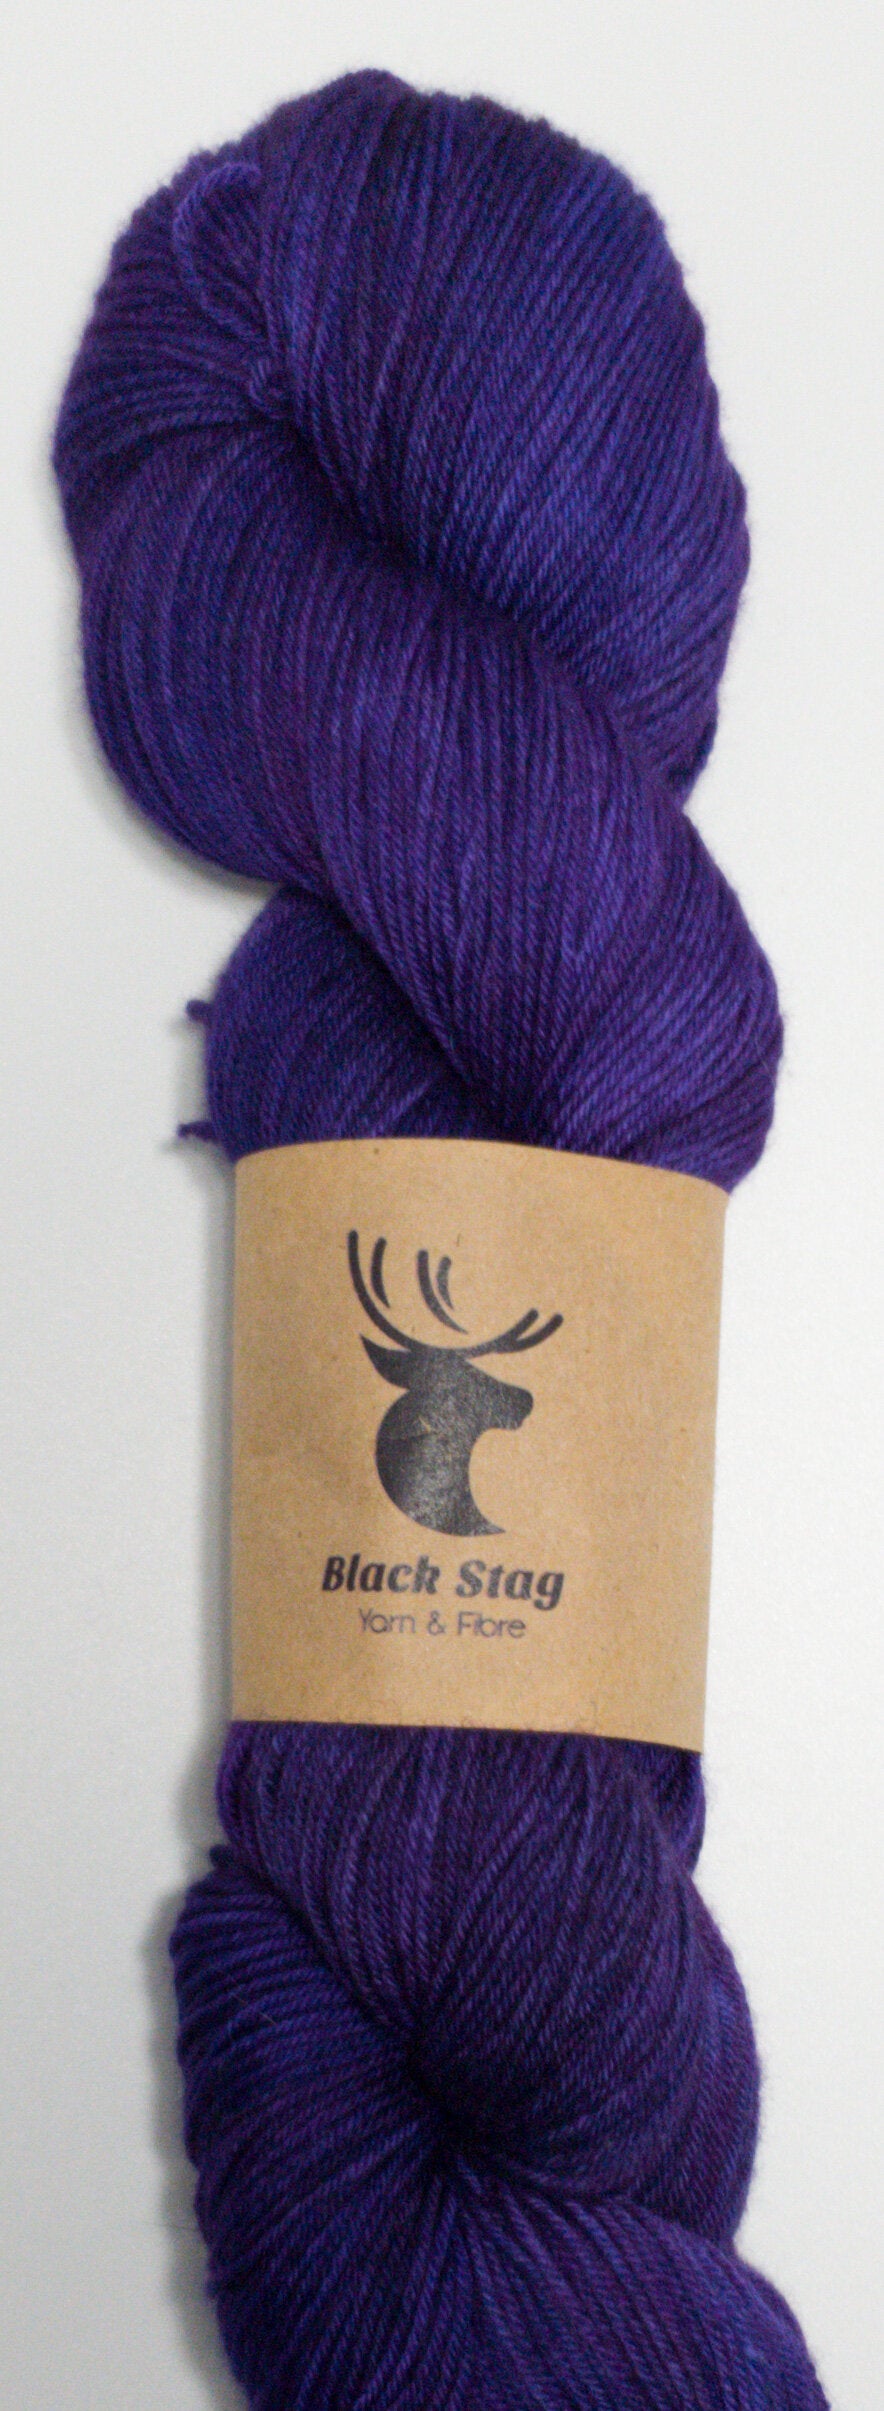 The Yarn formerly known as Prince- 100% Merino